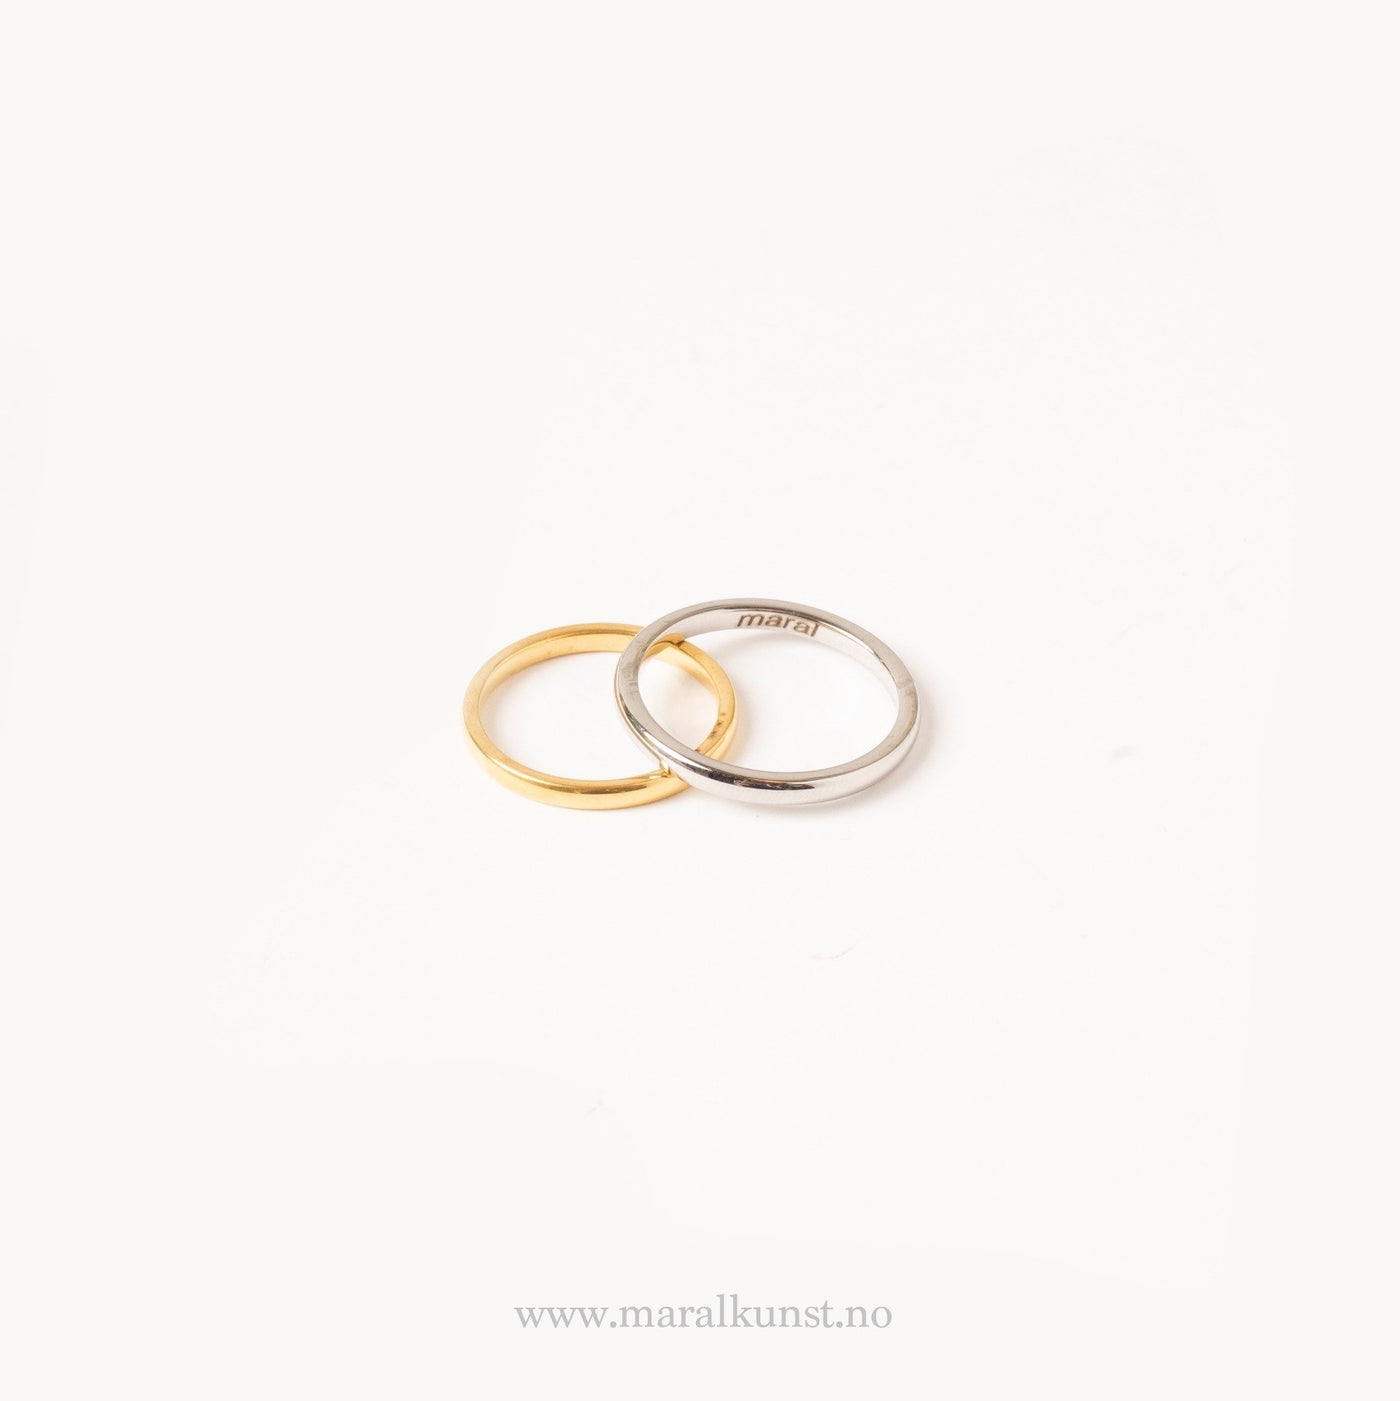 Stackable Thin Band Ring in Gold - Maral Kunst Jewelry